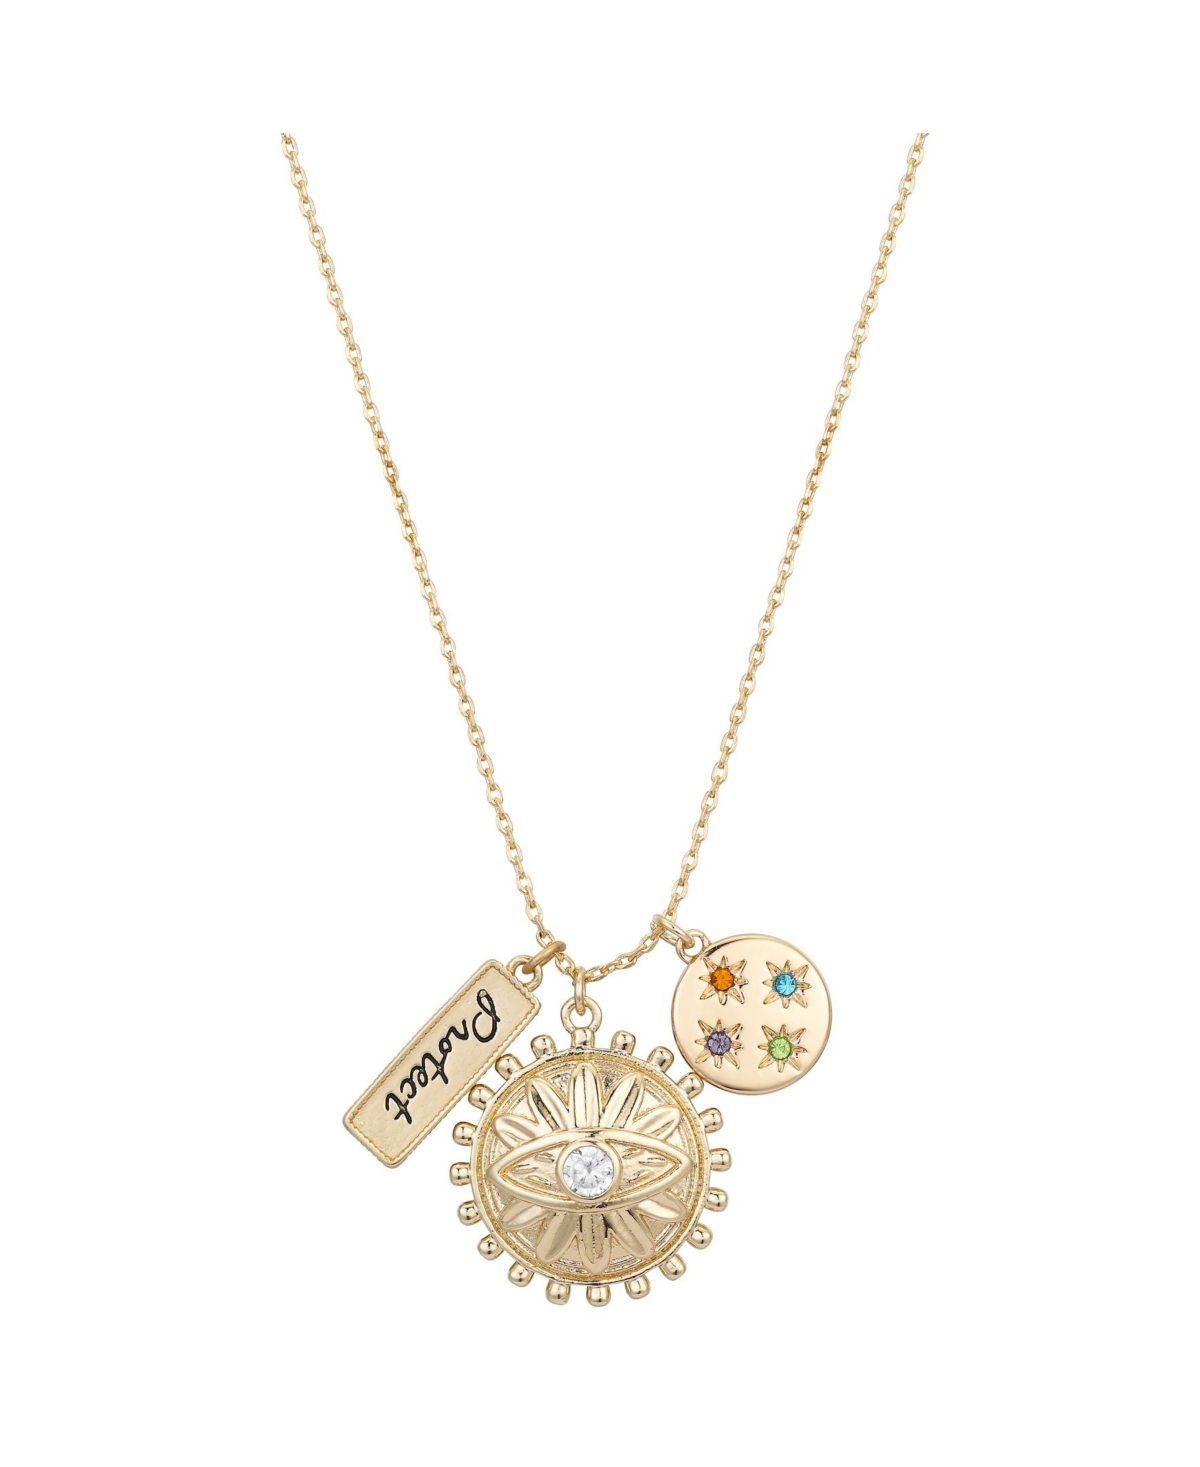 Multi Crystal Protect Charm Pendant Necklace - Gold